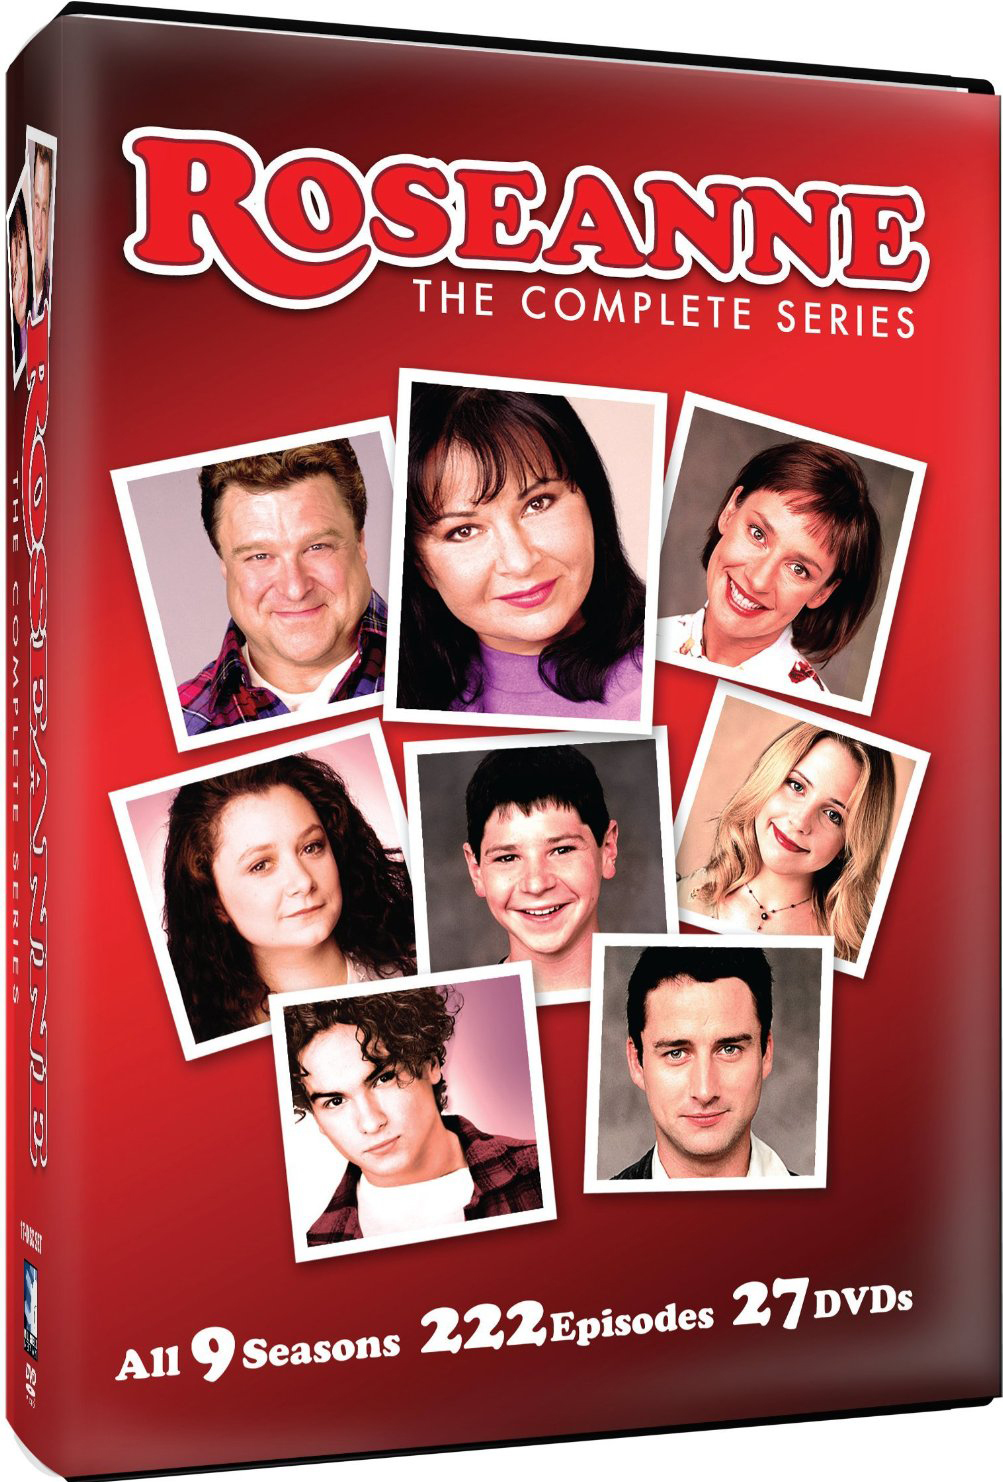 Roseanne: The Complete Series